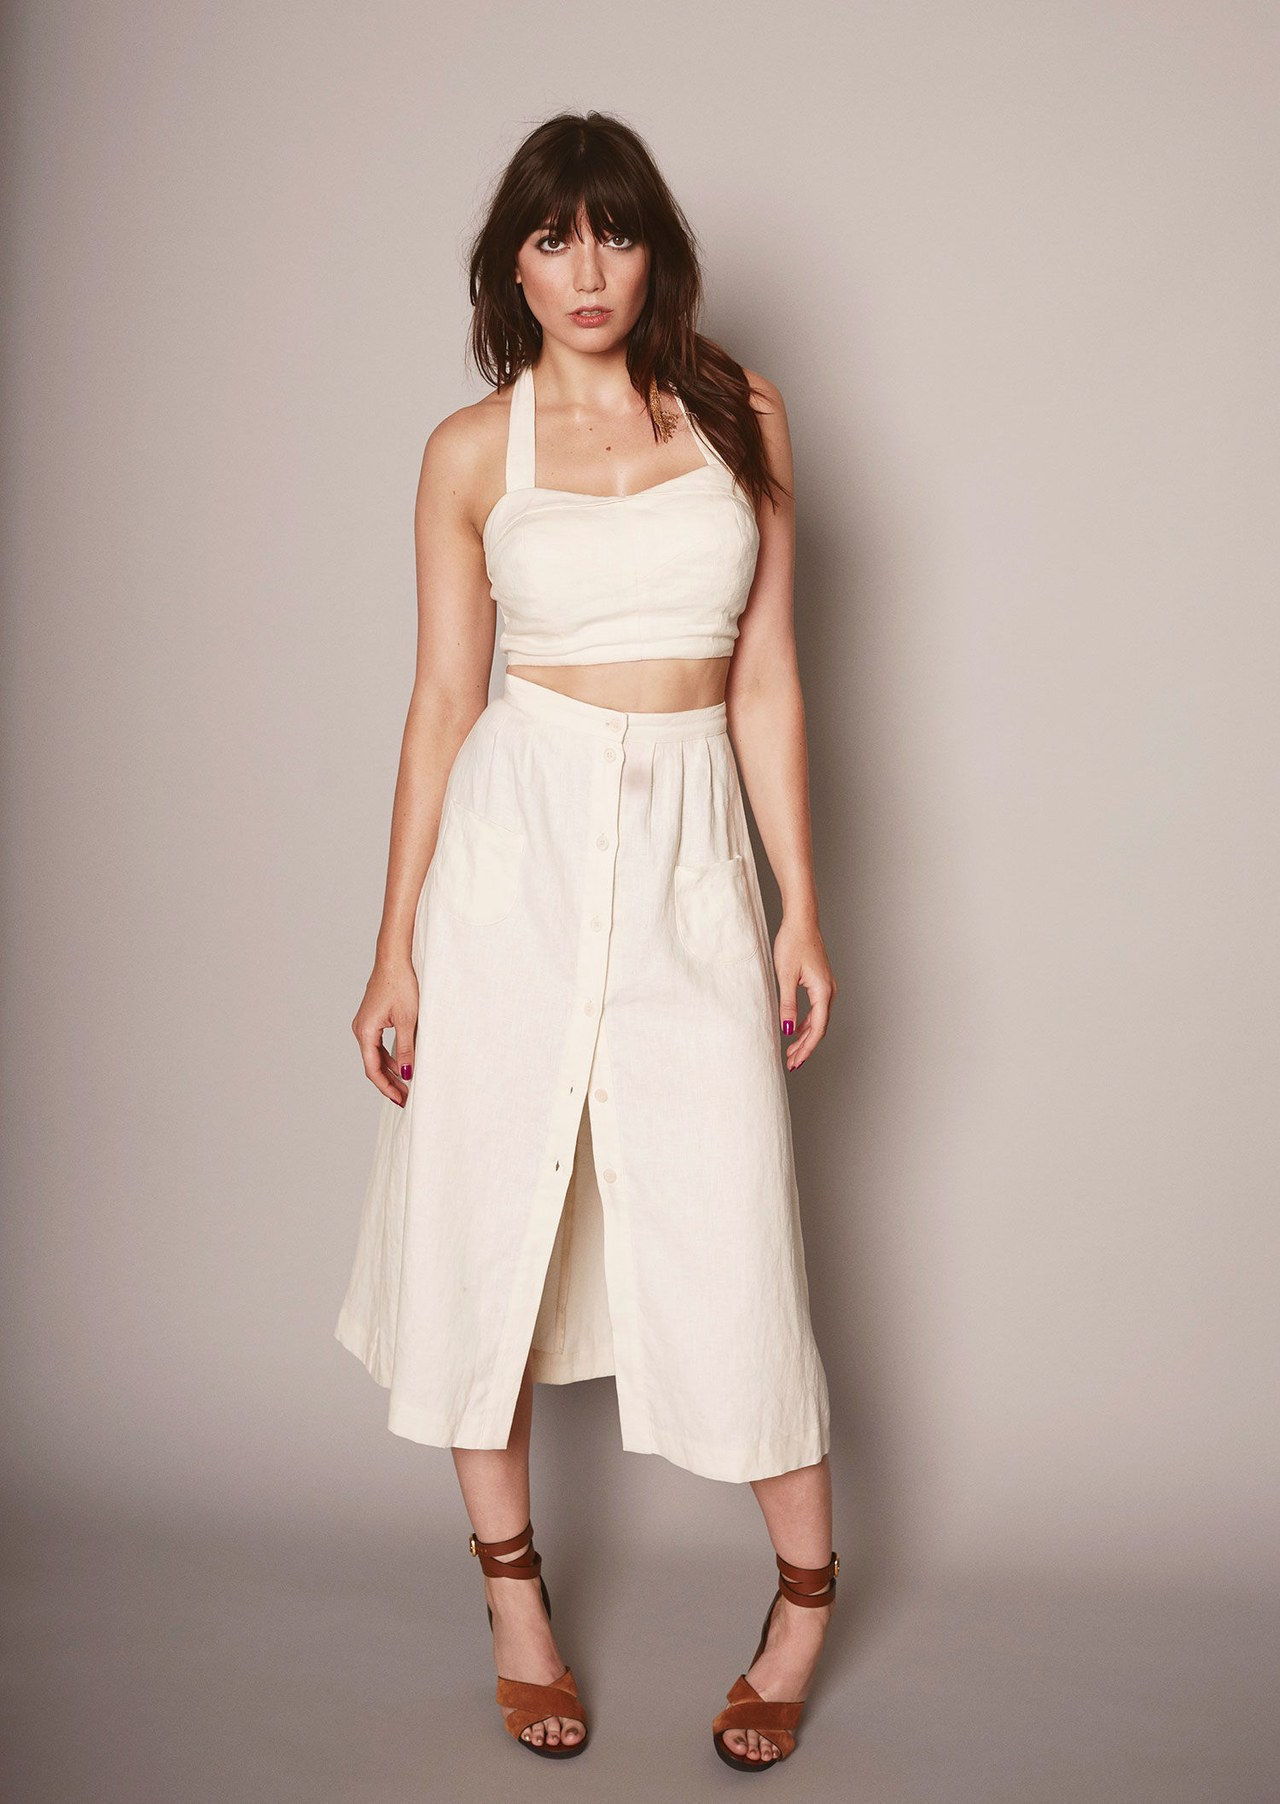 reforma big bust collection white crop top